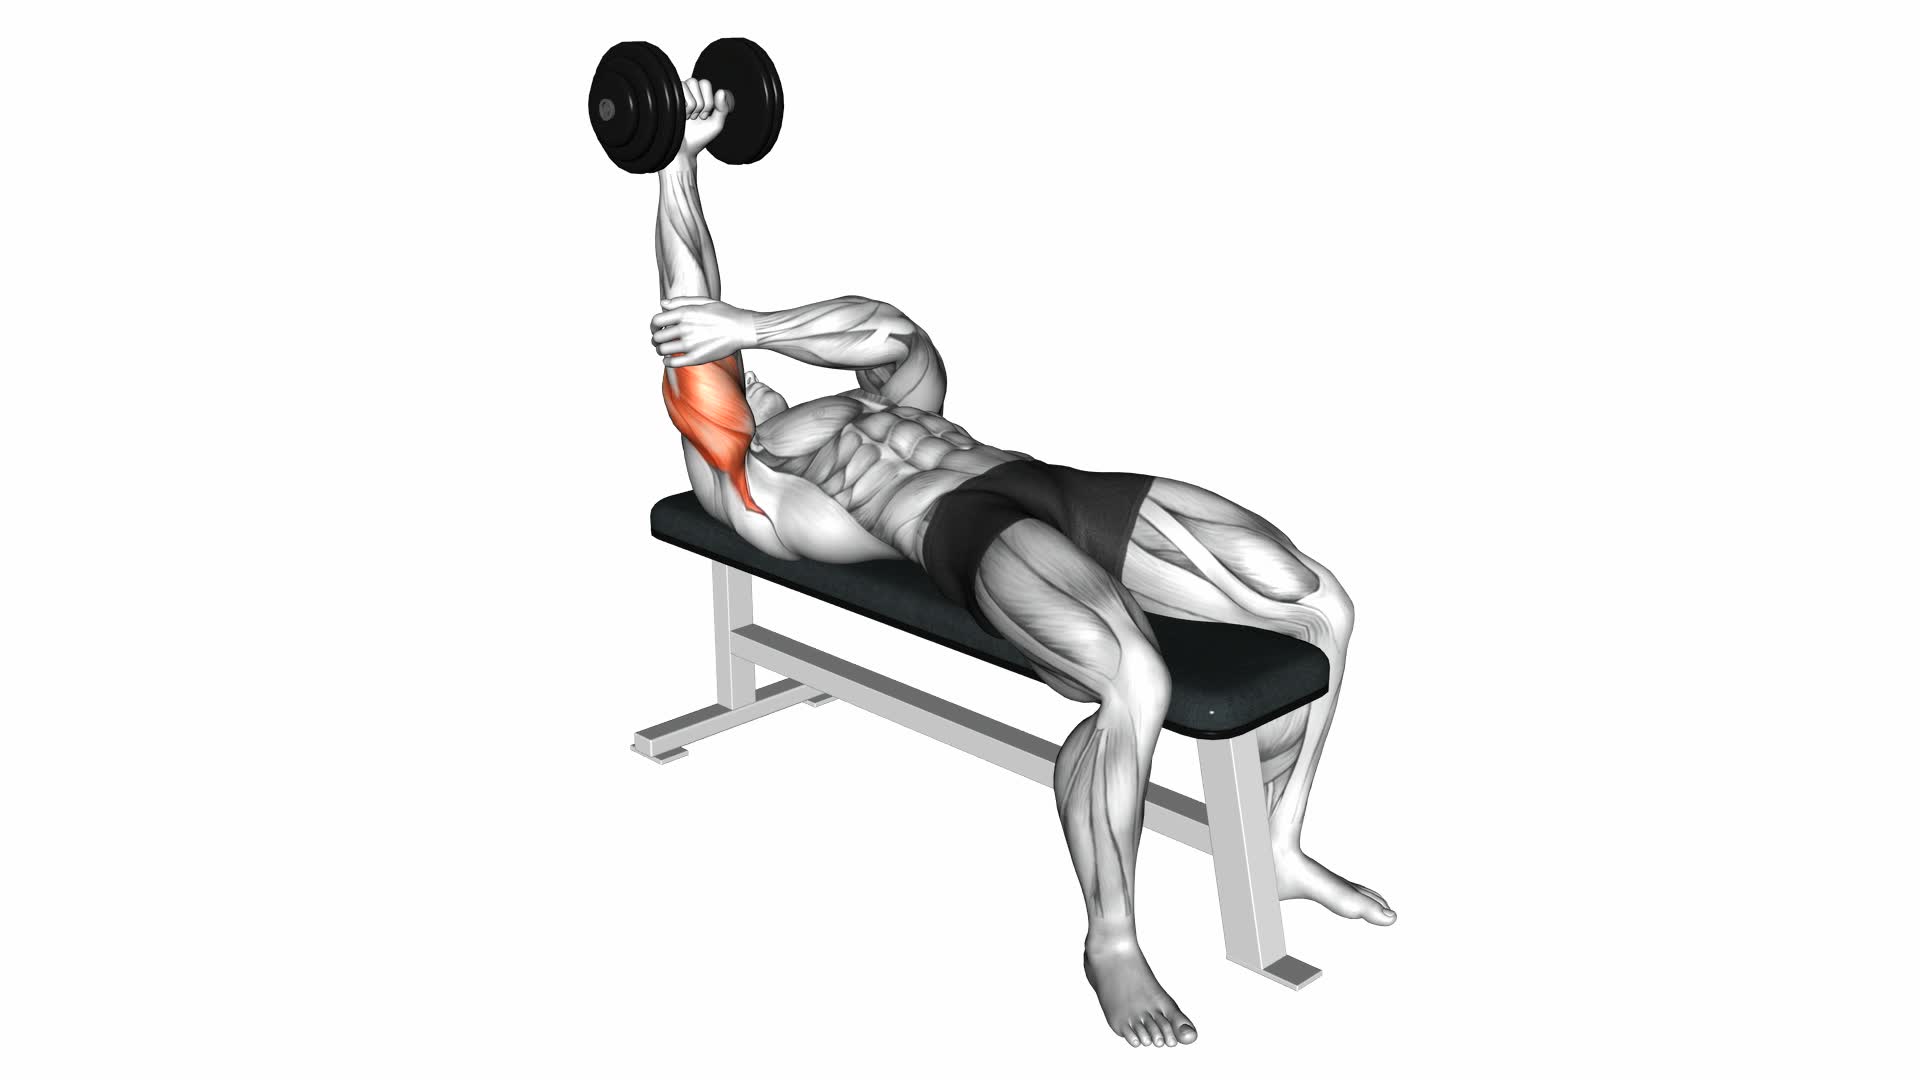 Dumbbell Lying One Arm Pronated Triceps Extension - Video Exercise Guide & Tips